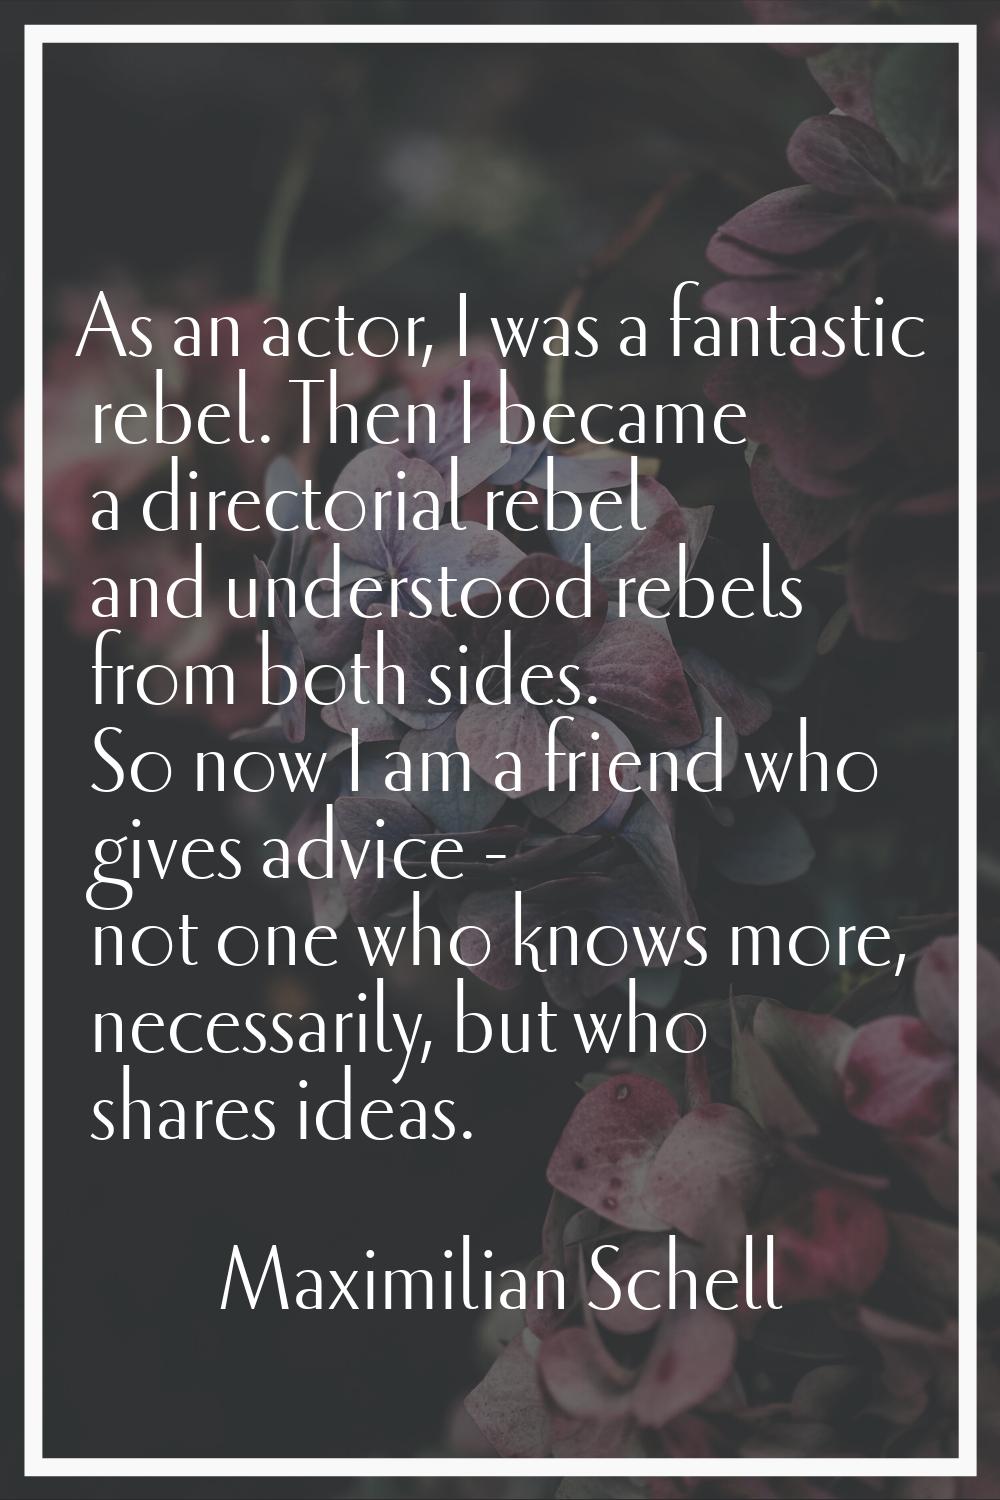 As an actor, I was a fantastic rebel. Then I became a directorial rebel and understood rebels from 